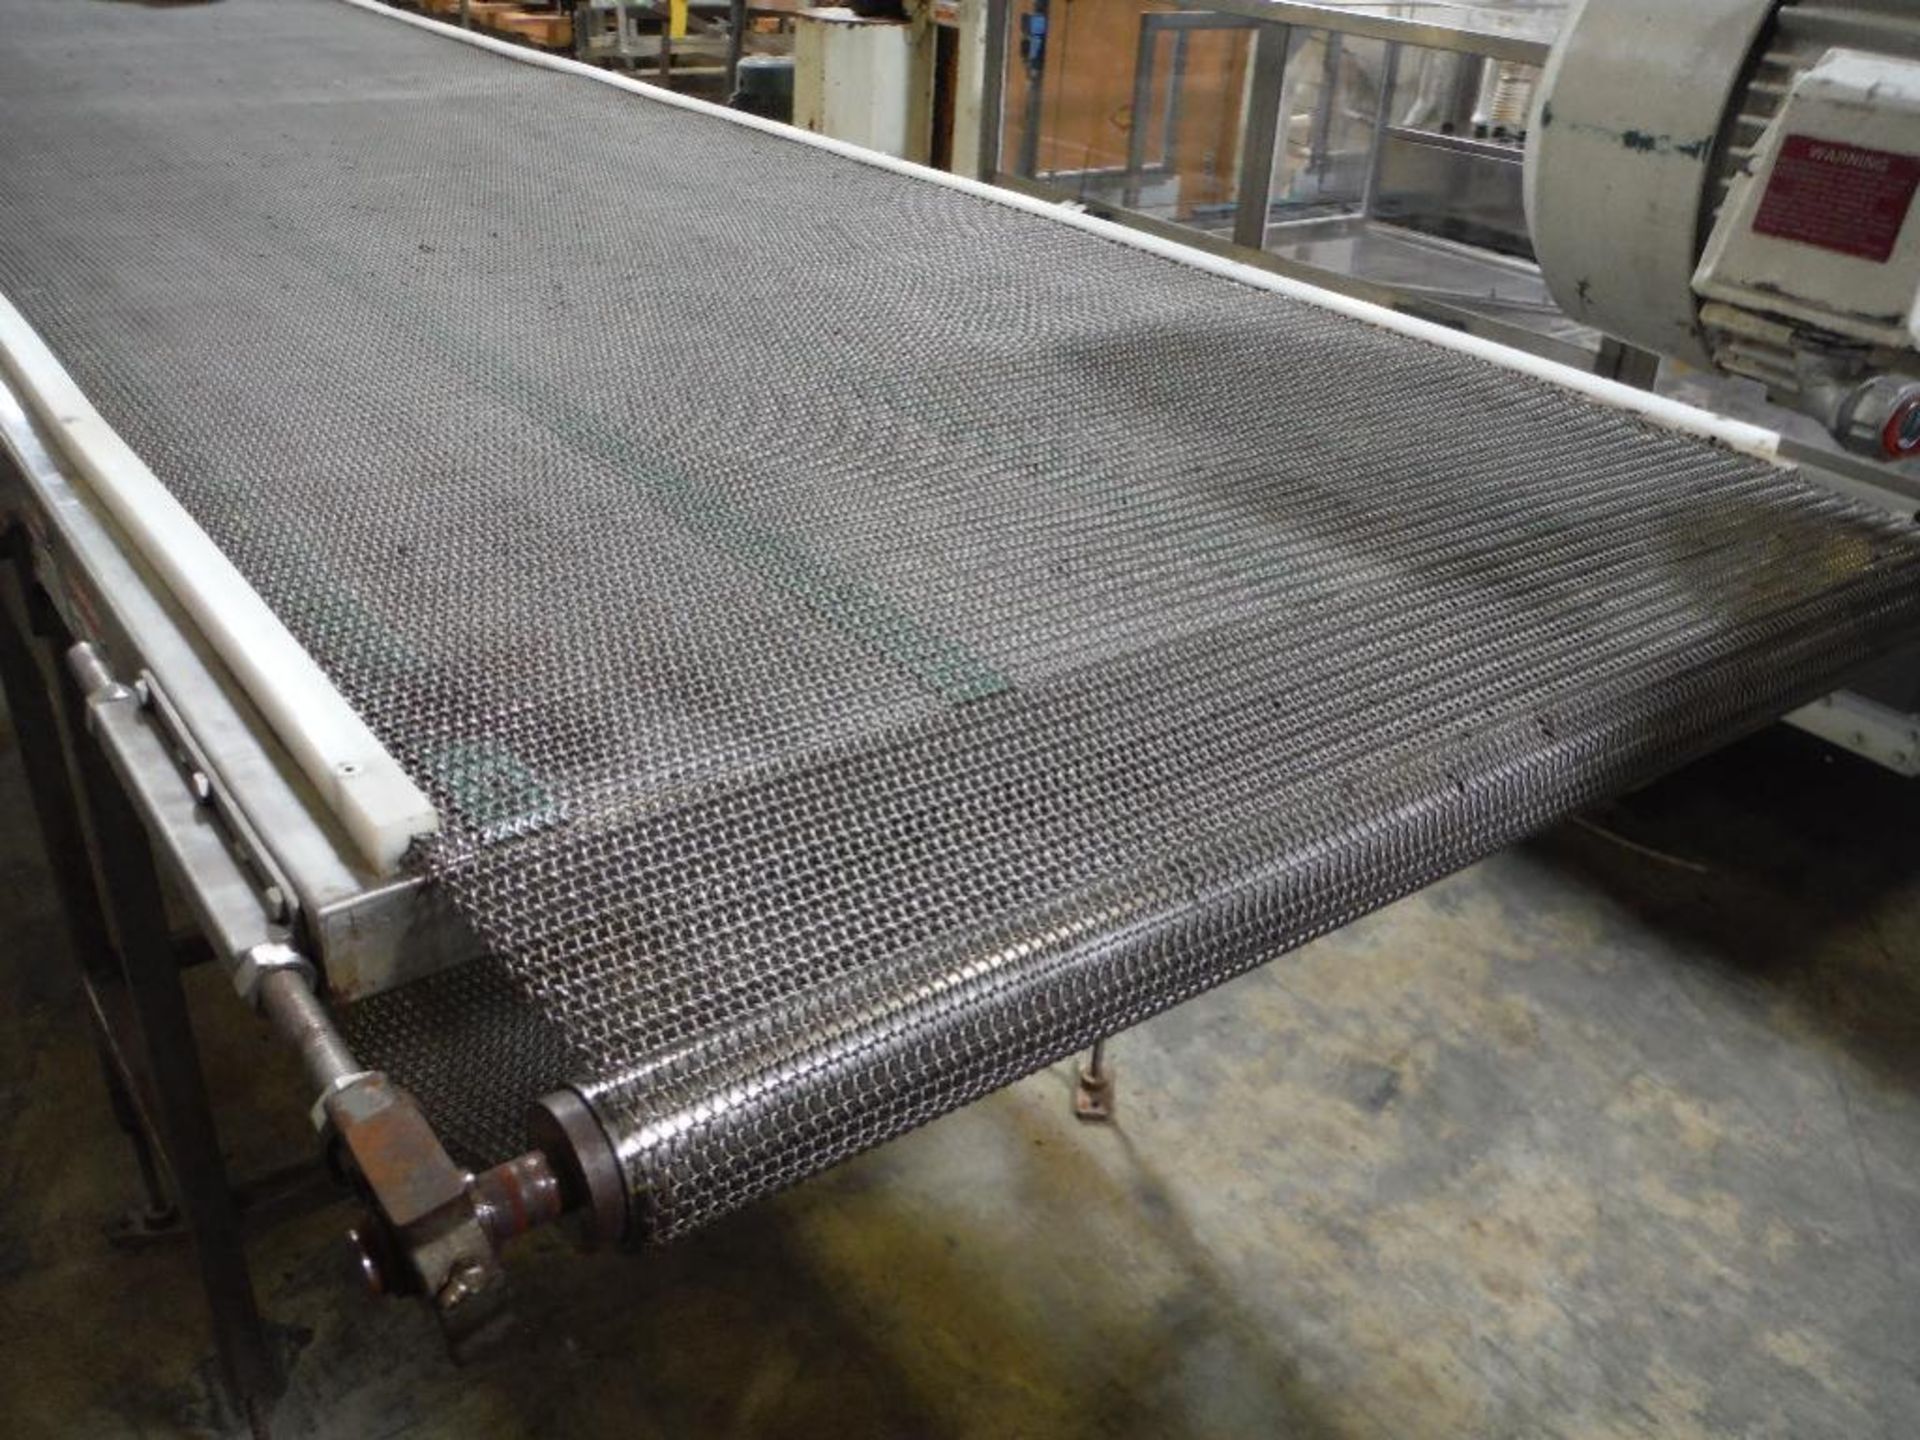 Mesh belt conveyor, 200 in. long x 43 in. wide x 46 in. tall, SS frame, carbon steel legs, motor and - Image 2 of 7